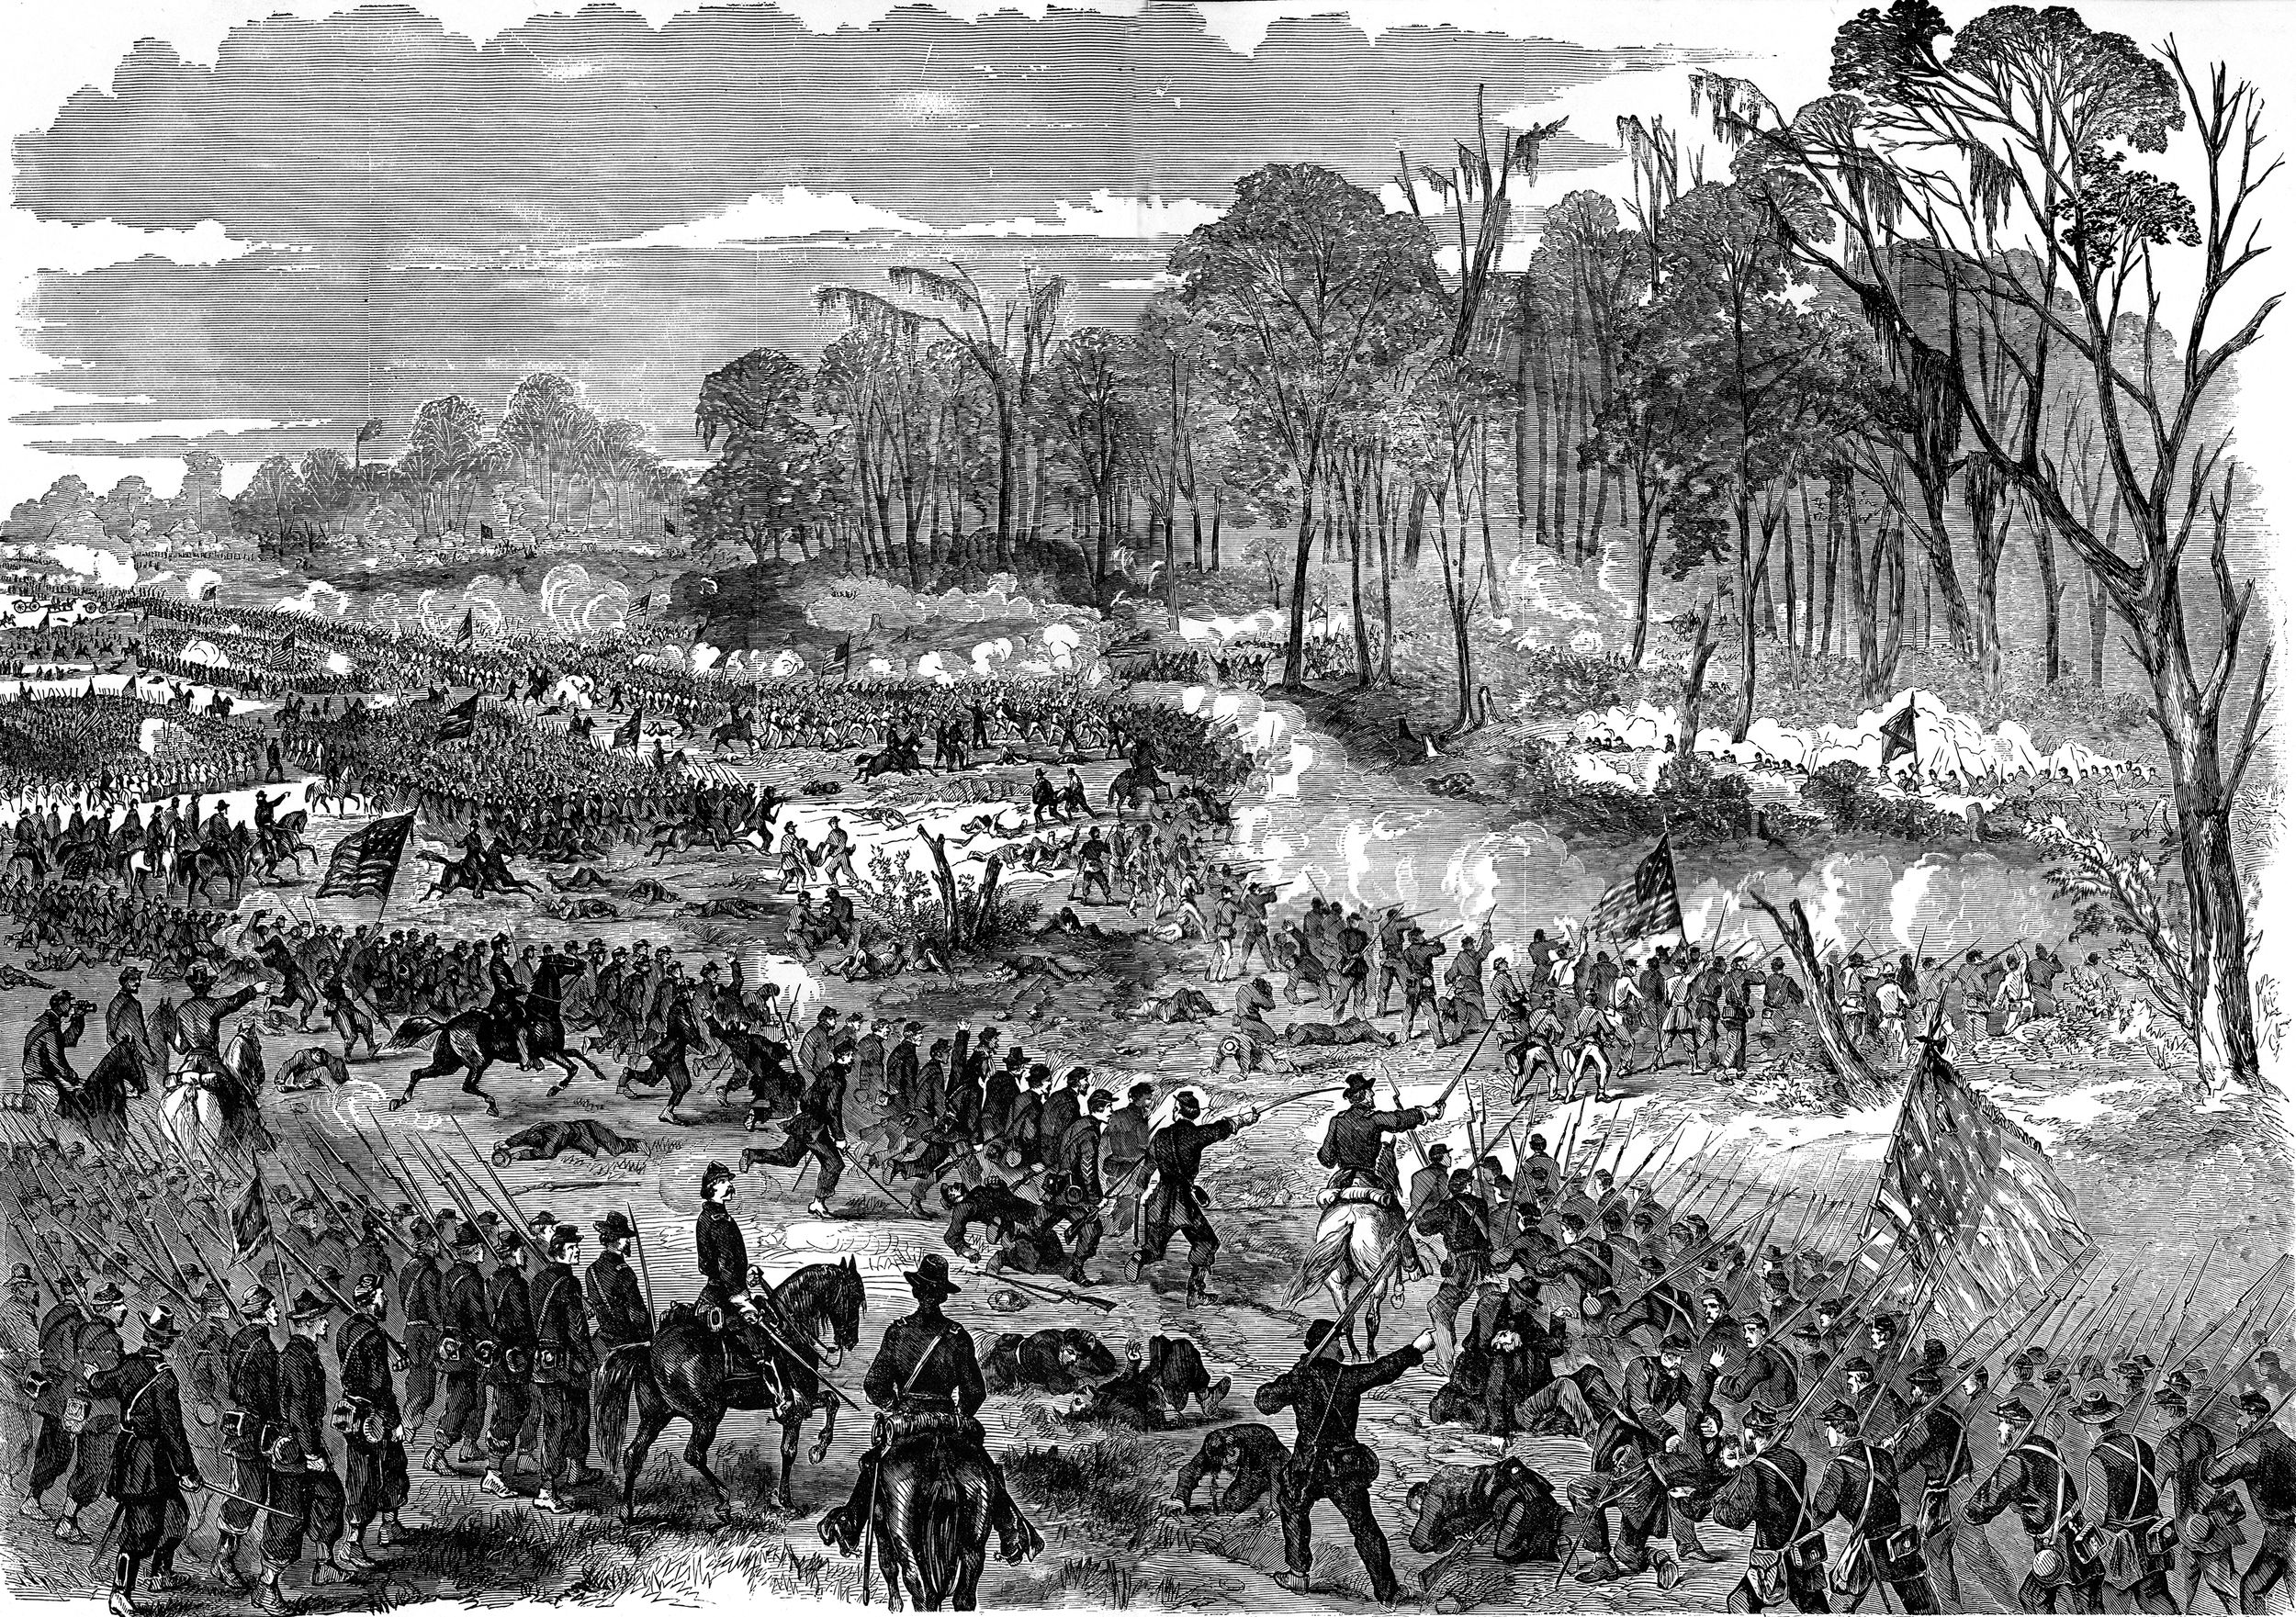 Grant plugged a breach in the Union center made by Bowen's counterattacking Confederates, and then he organized a counterattack that swept the Confederates from the field. The following day the Union army won another victory at Big Black River that further depleted Pemberton’s ranks